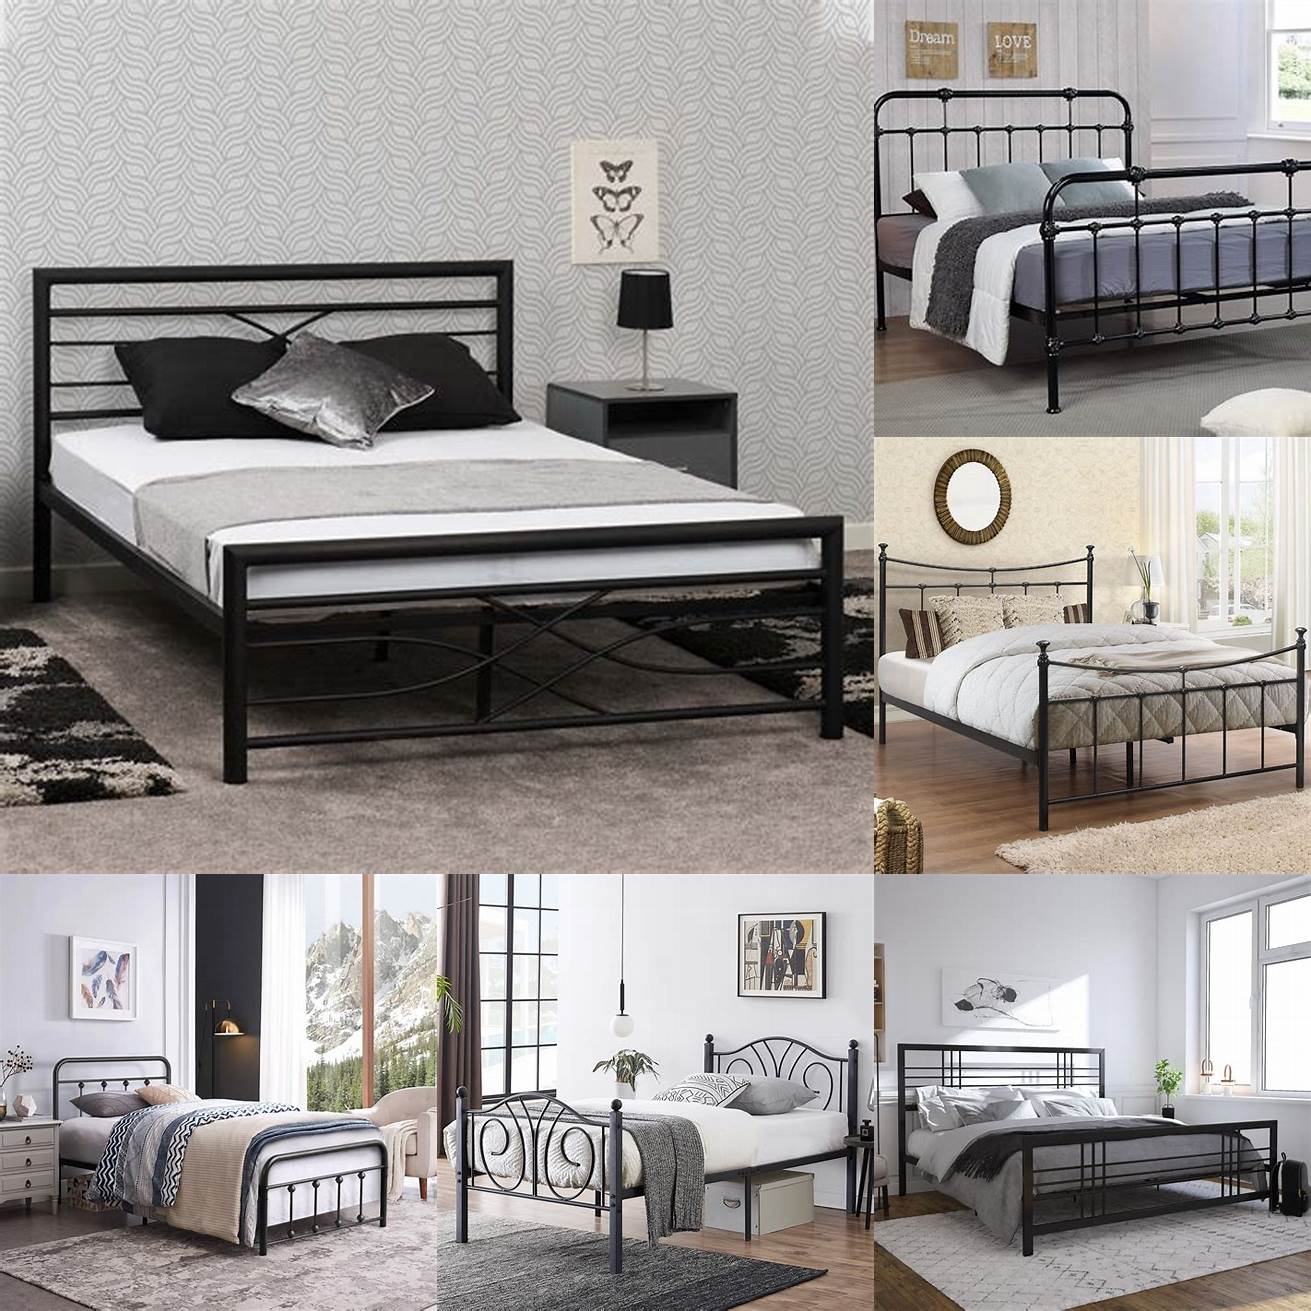 Double bed with a metal frame